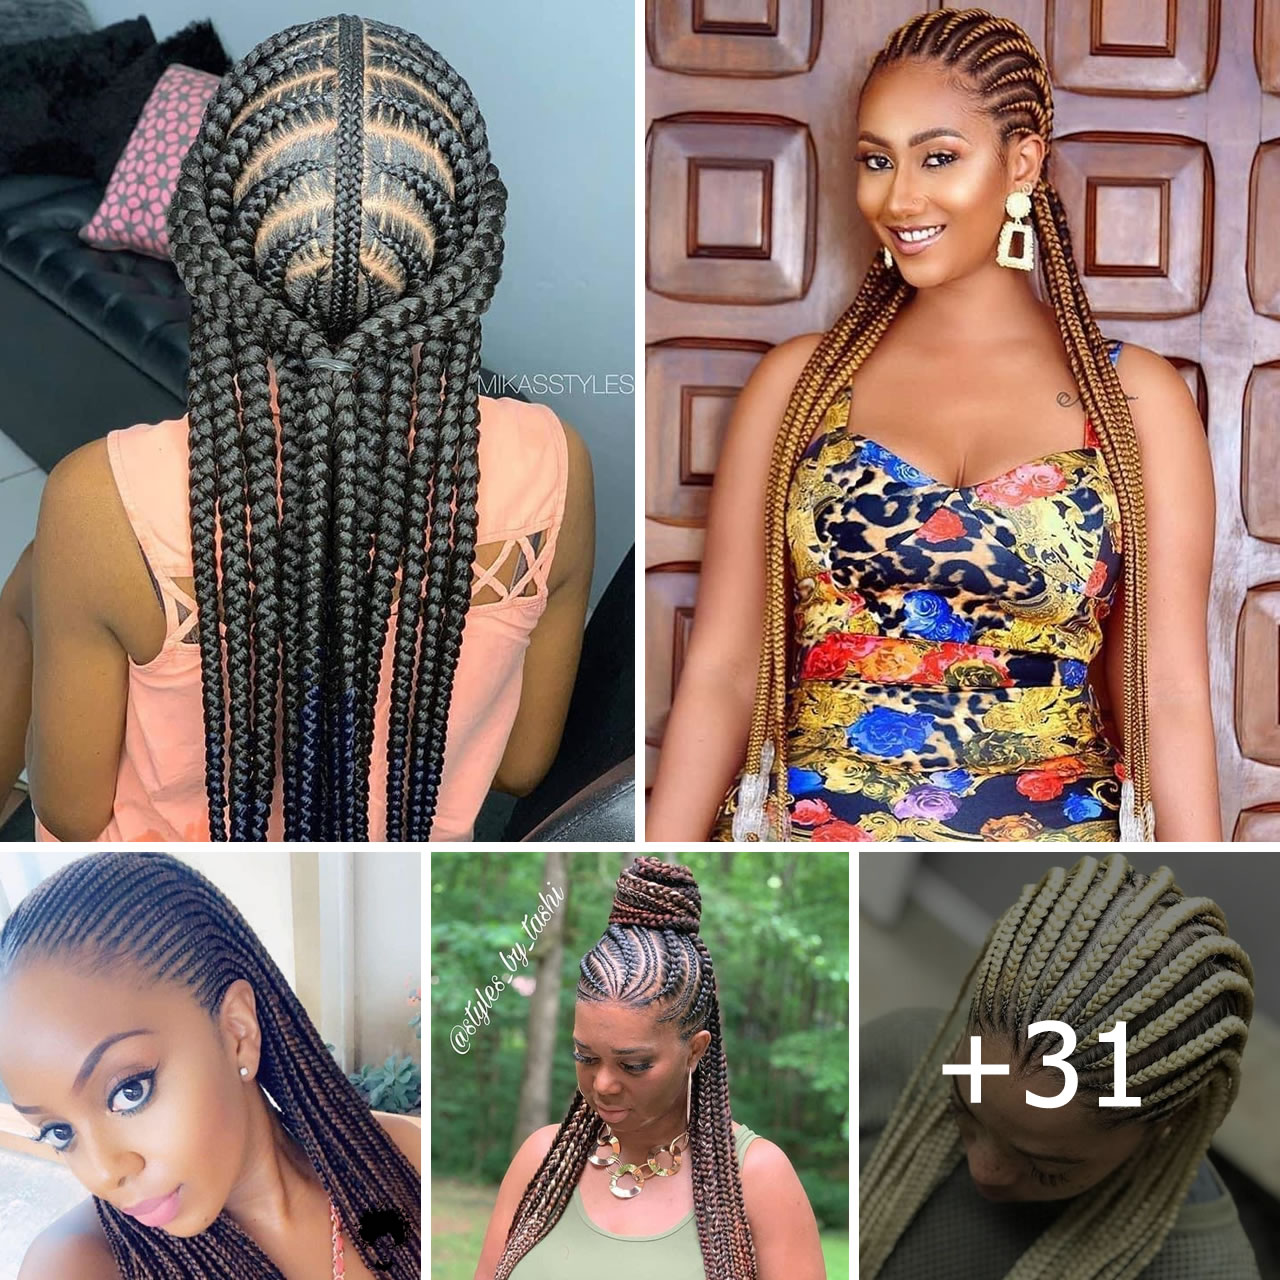 Stylish Recent Braided Hairstyles You Should Consider, Volume 1.